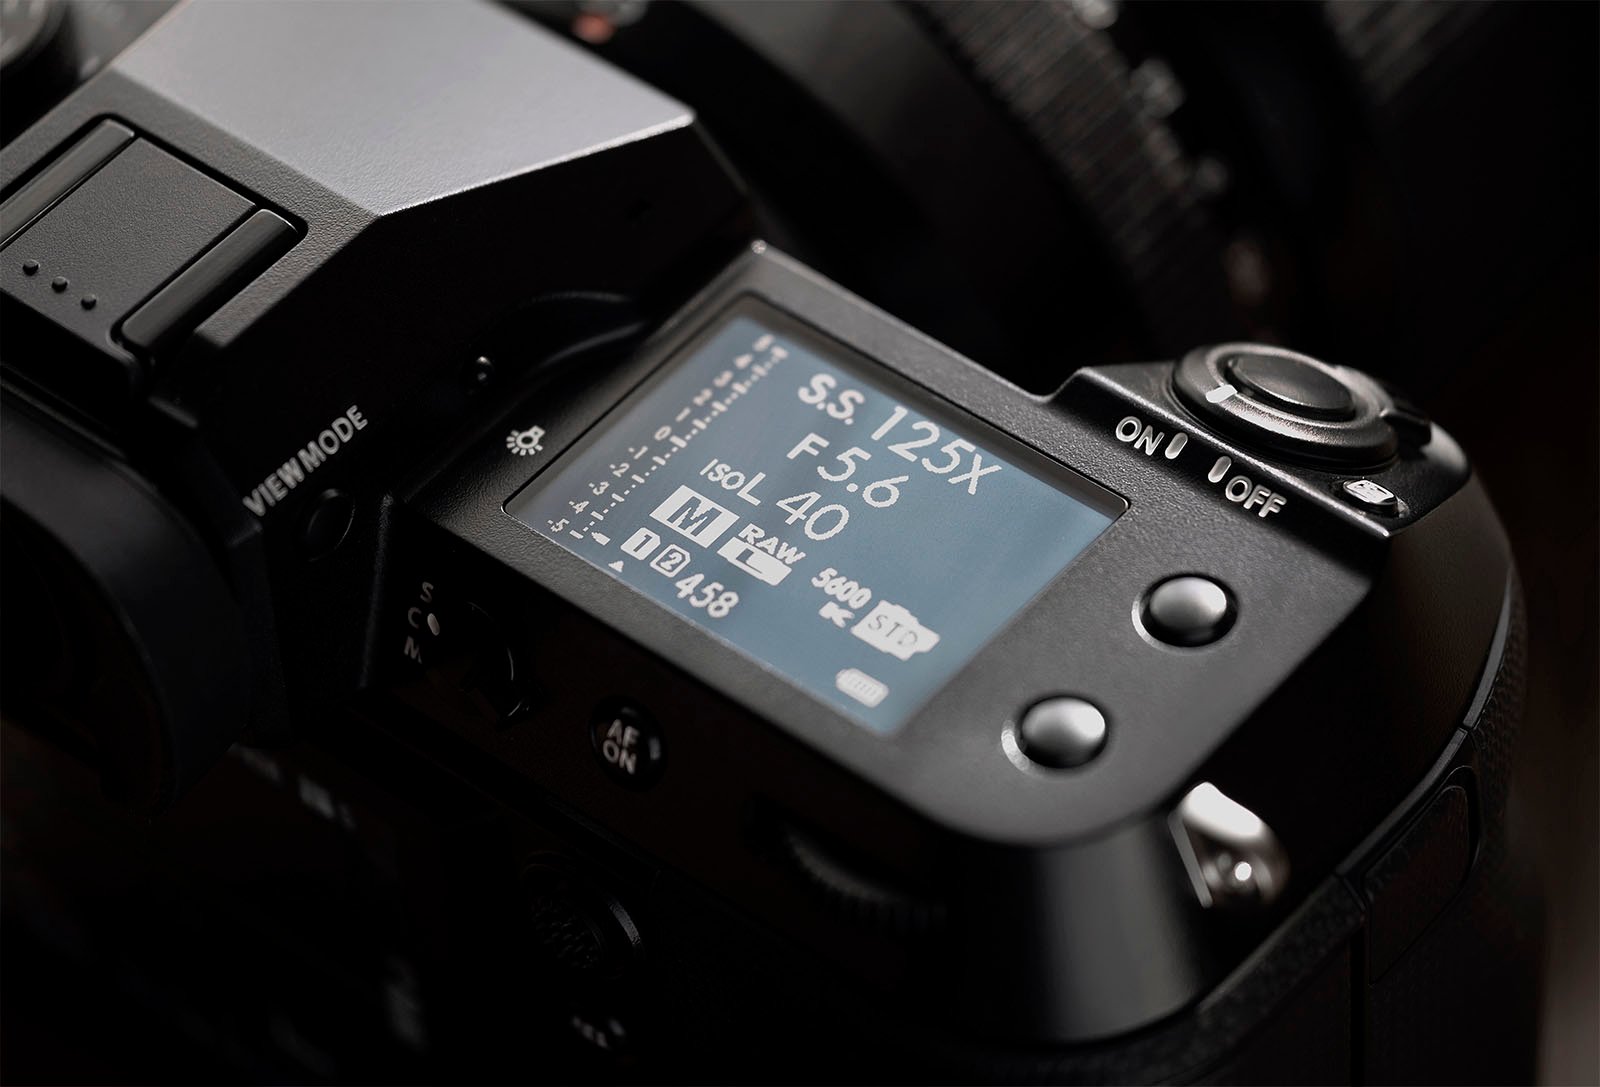 Close-up view of a digital camera's LCD screen displaying various settings, including shutter speed (125X), aperture (f/6.0), exposure time (40"), ISO (3600), focus mode (AF-S), and remaining battery level (458). The camera is set to Manual (M) mode.